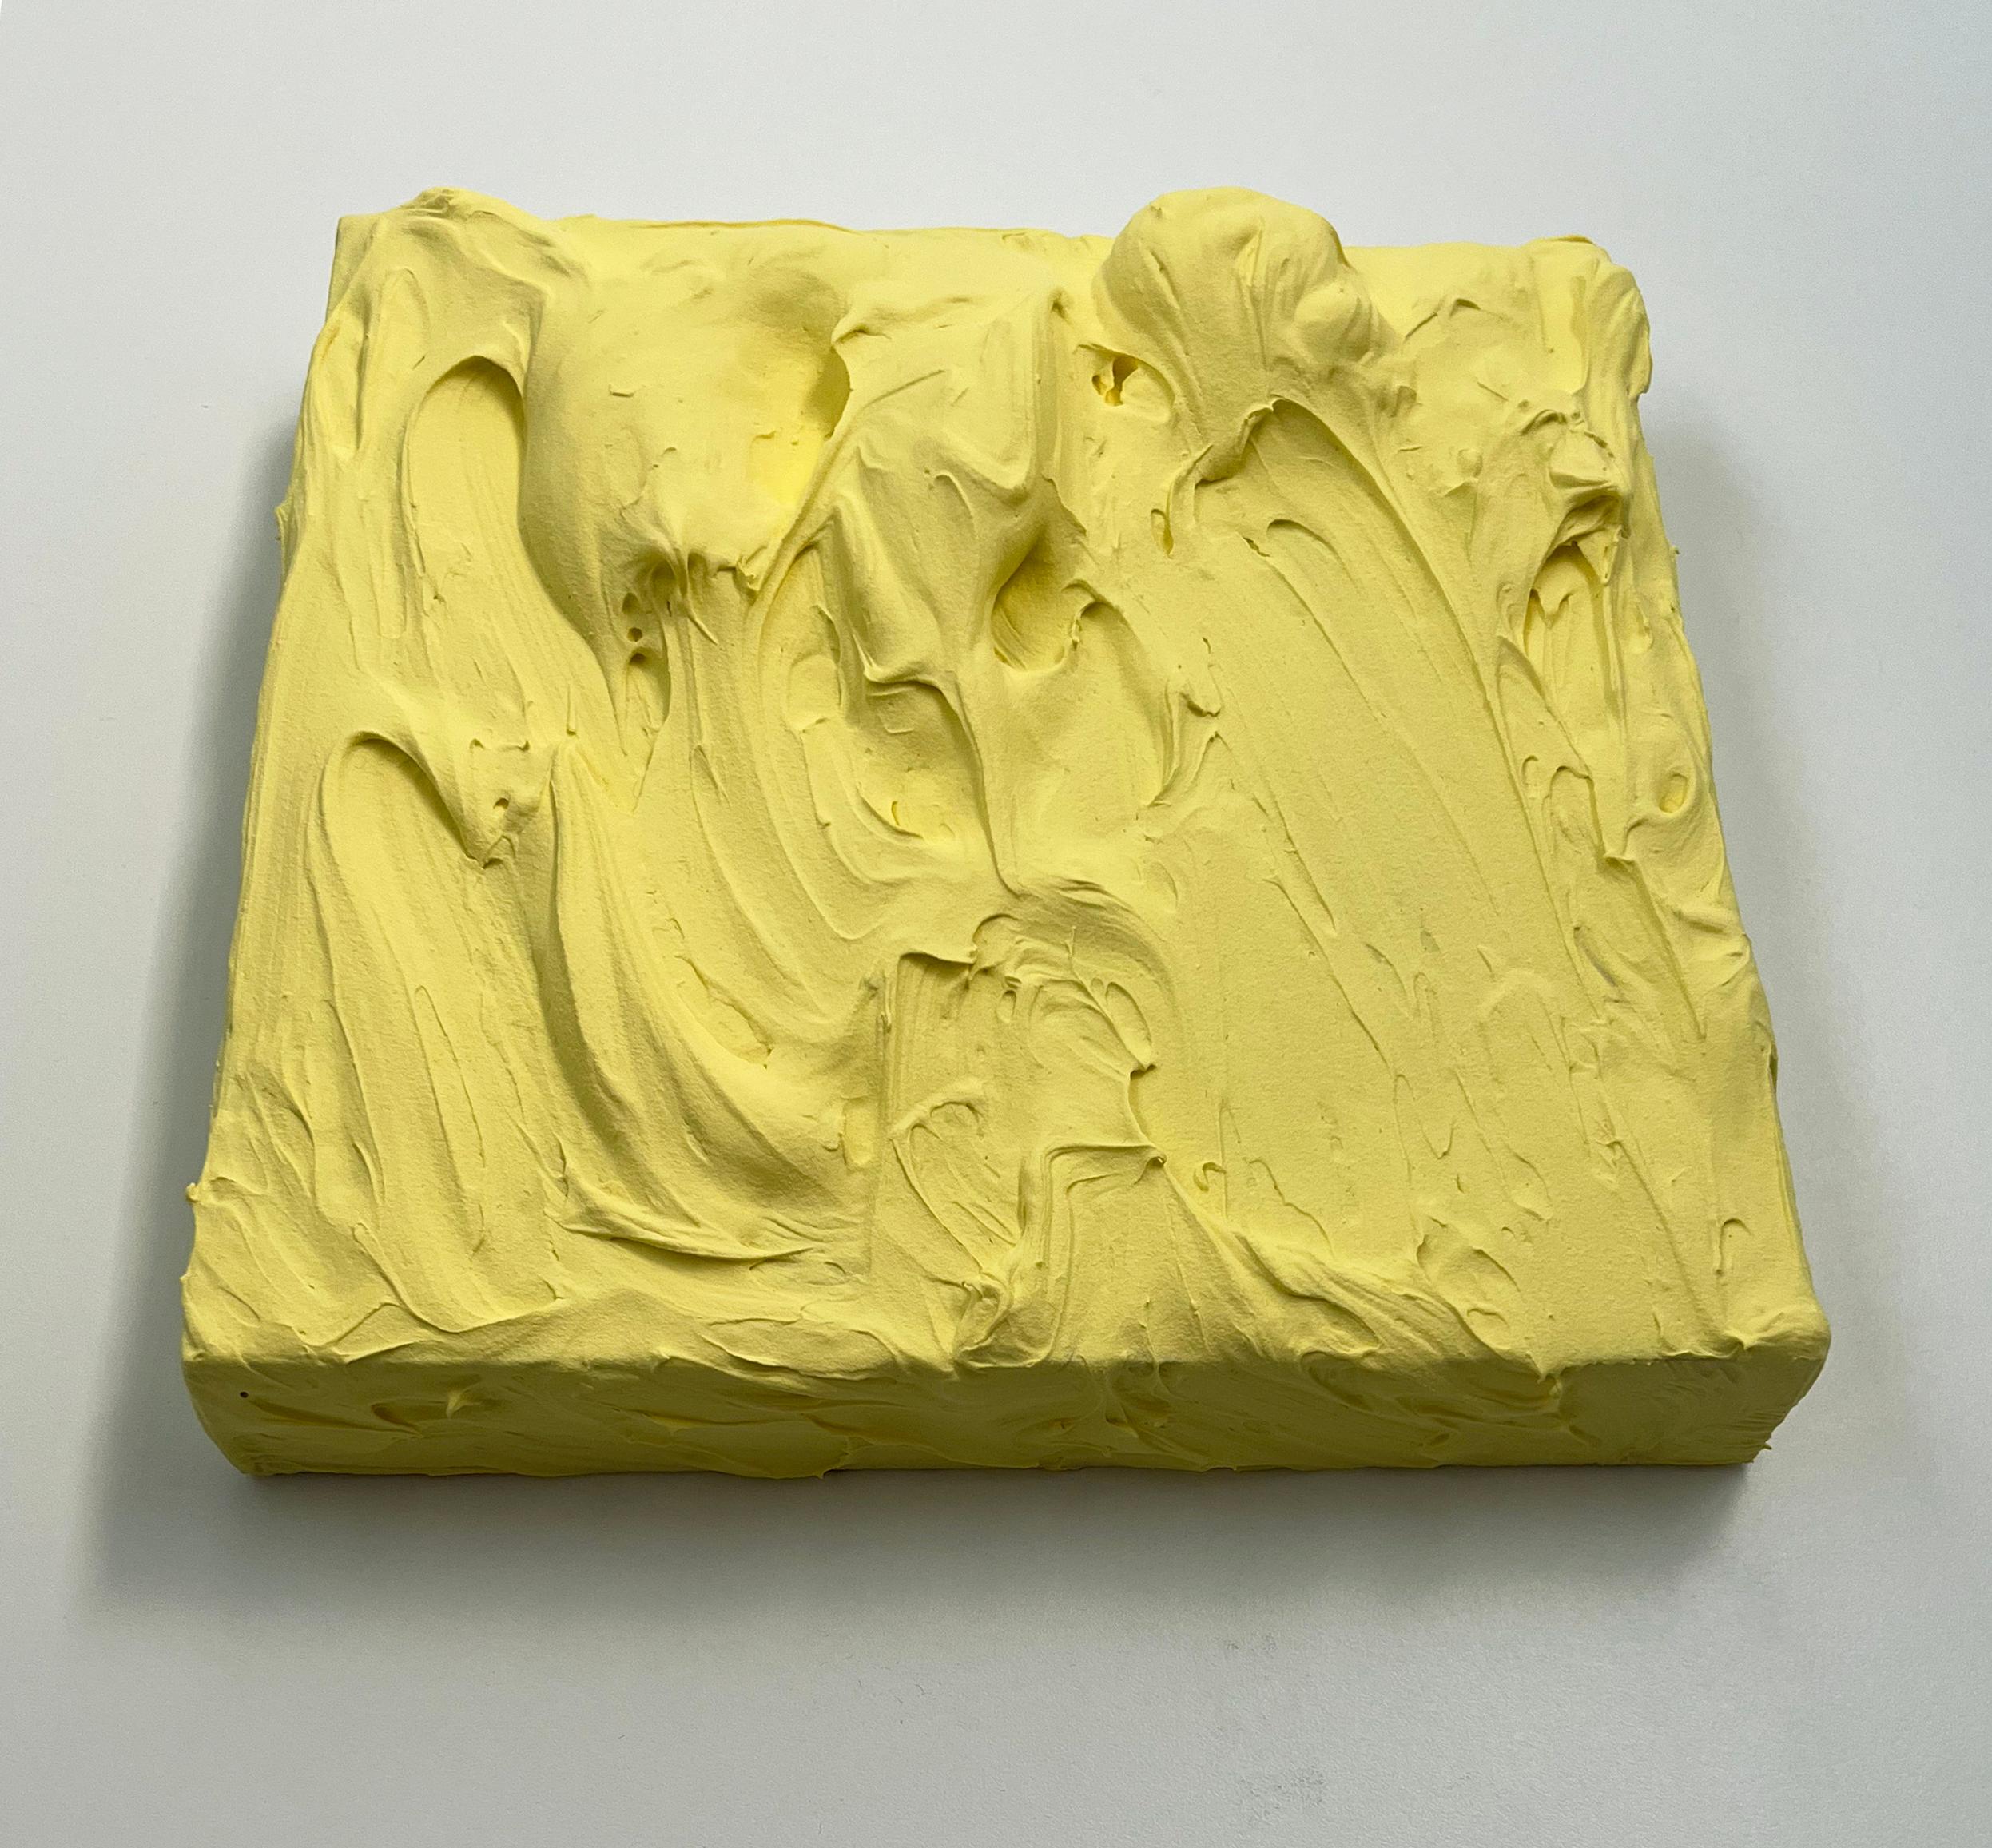 Butter Excess is a thick and vibrant impasto painting on wood. The elegant texture is spontaneously built up and creates the dynamic surface composition. This creates an engaging artwork where light circulates on the surface and shadows are